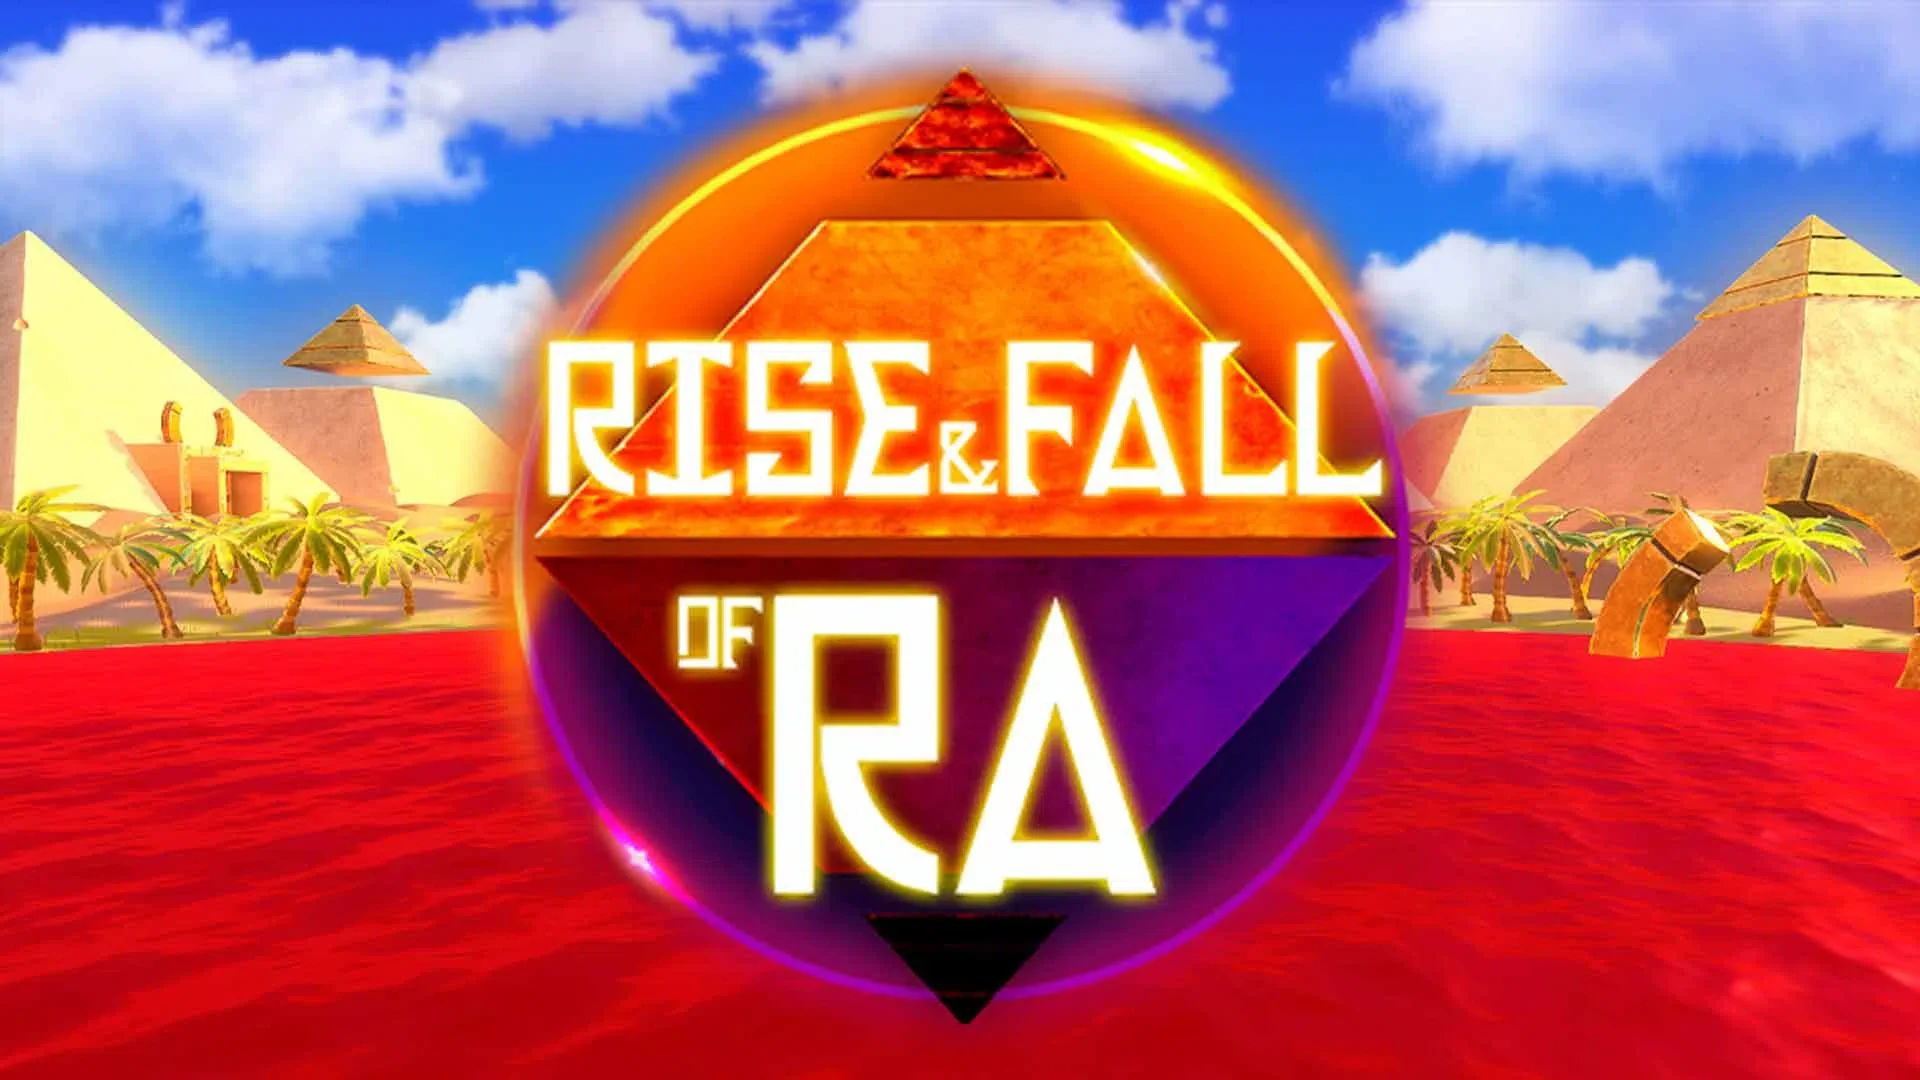 Rise and Fall of Ra